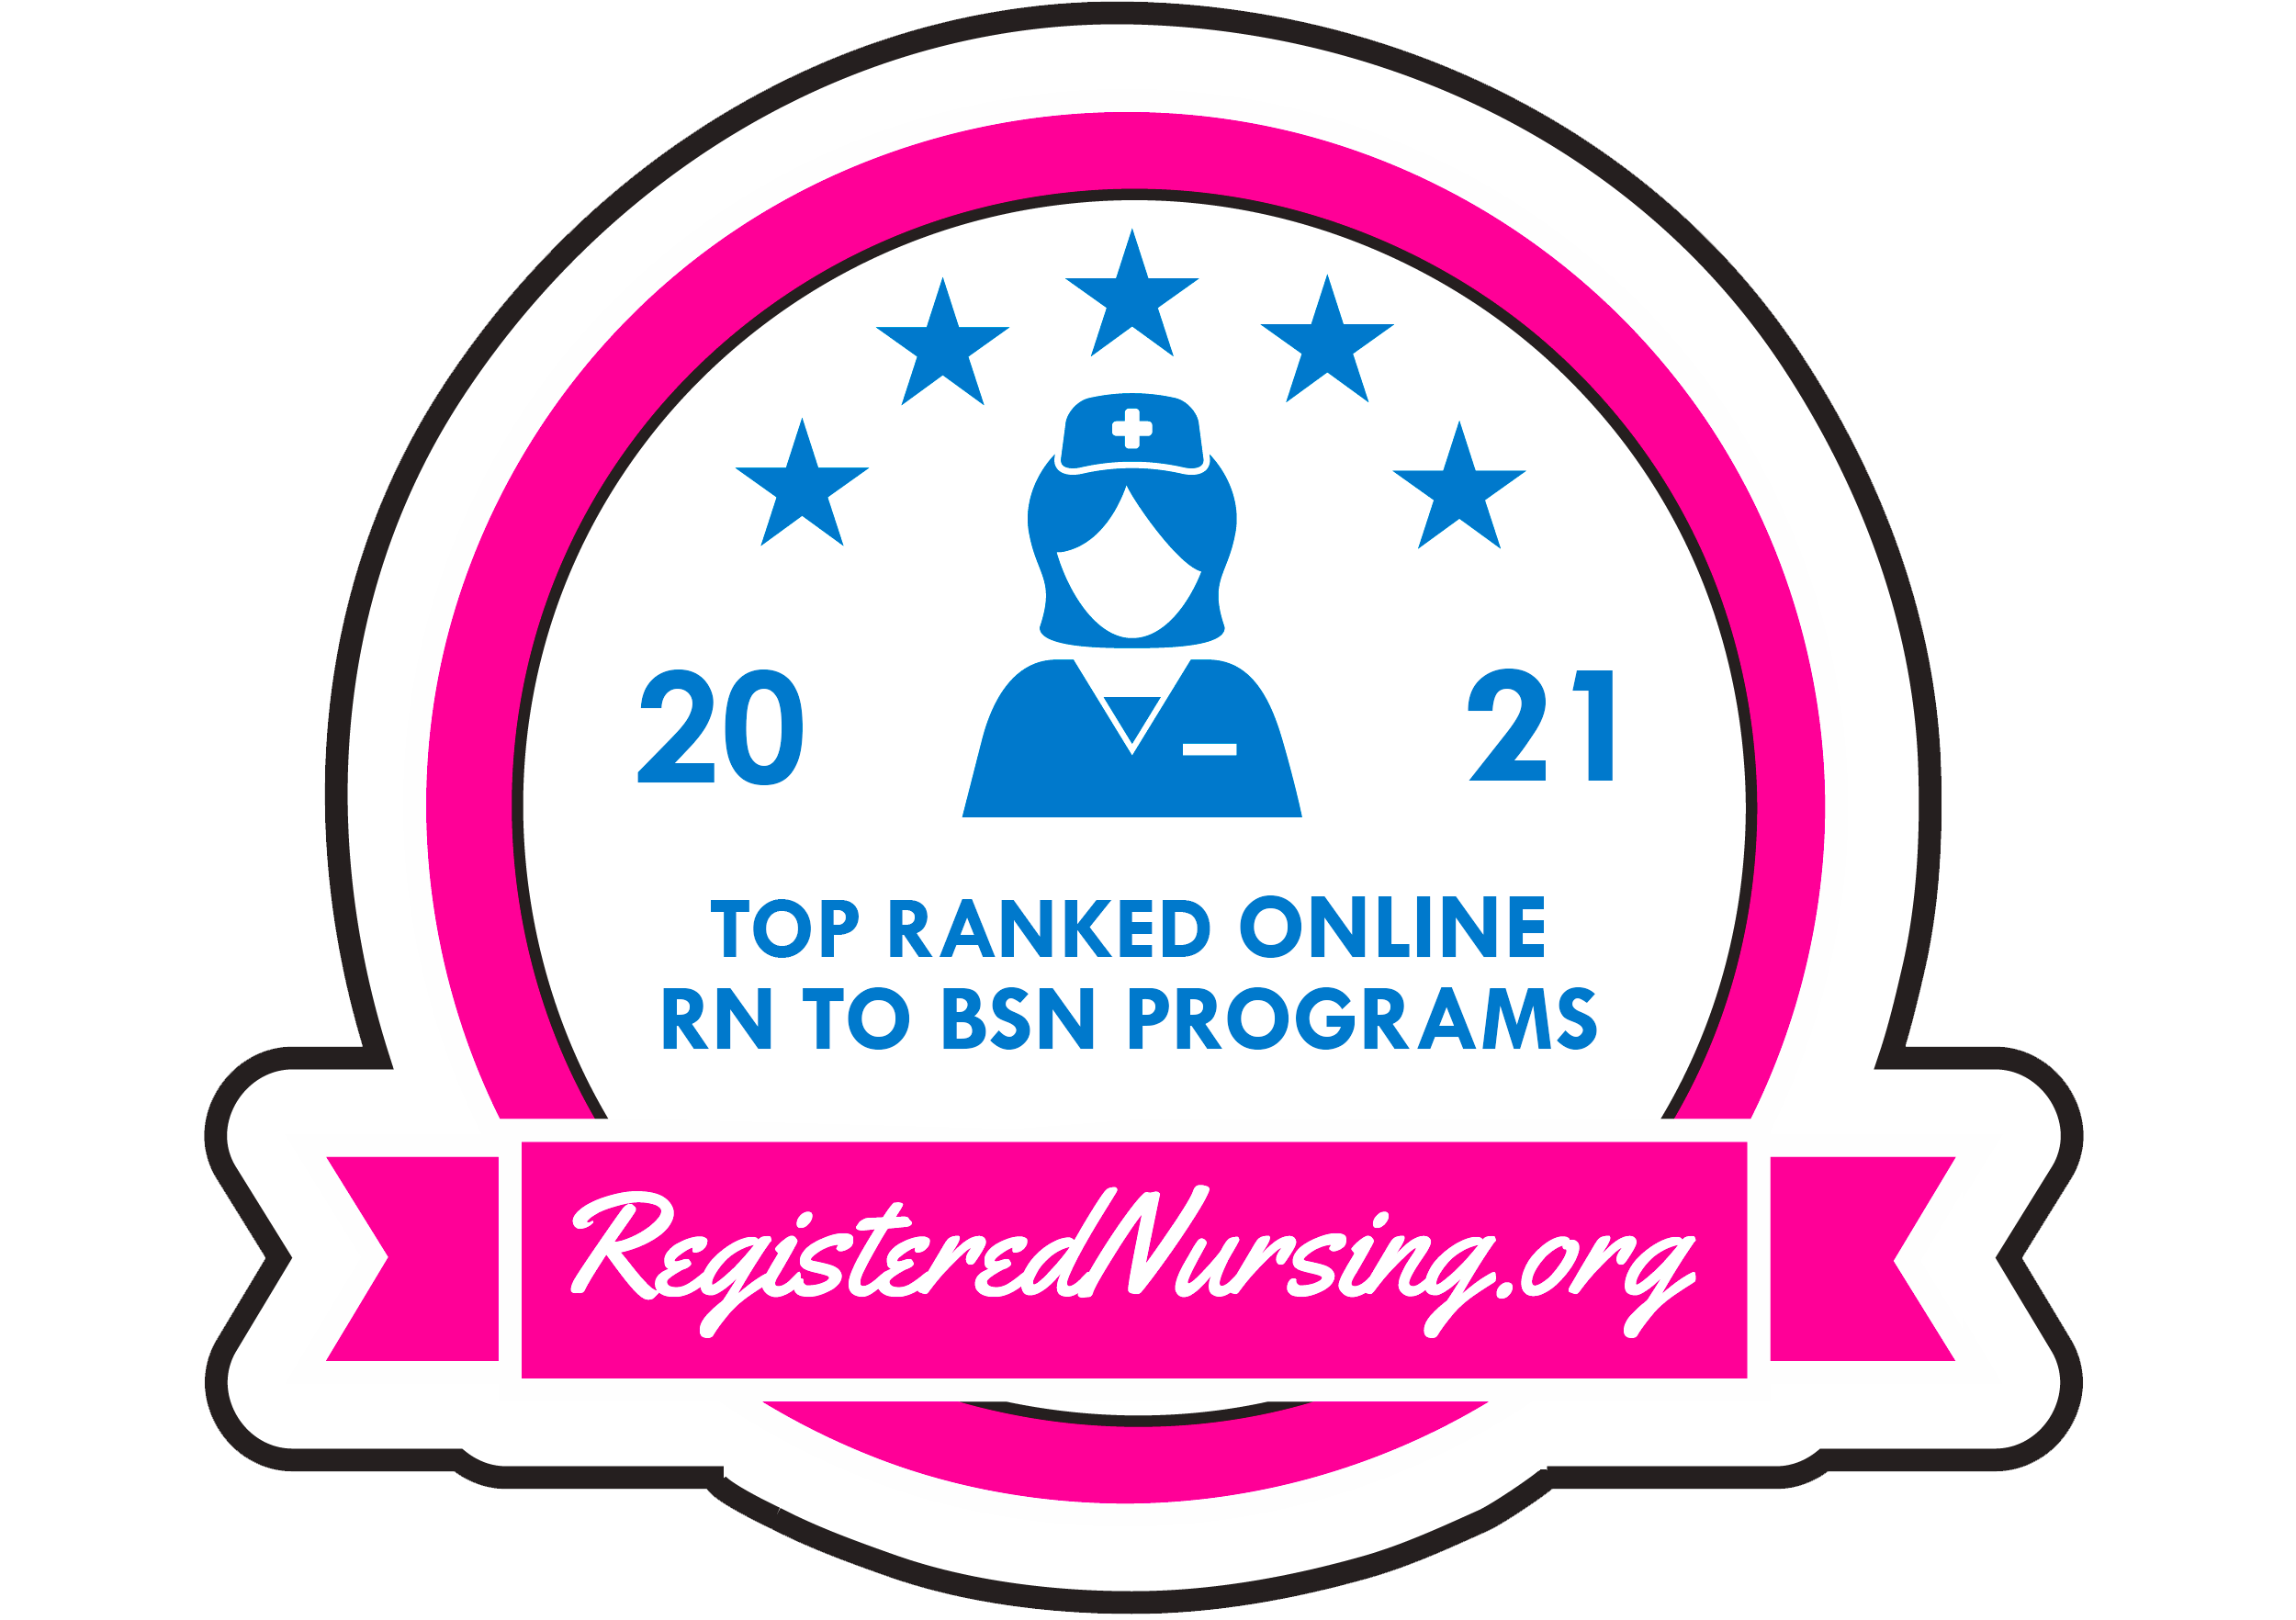 RN to BSN ranked #4